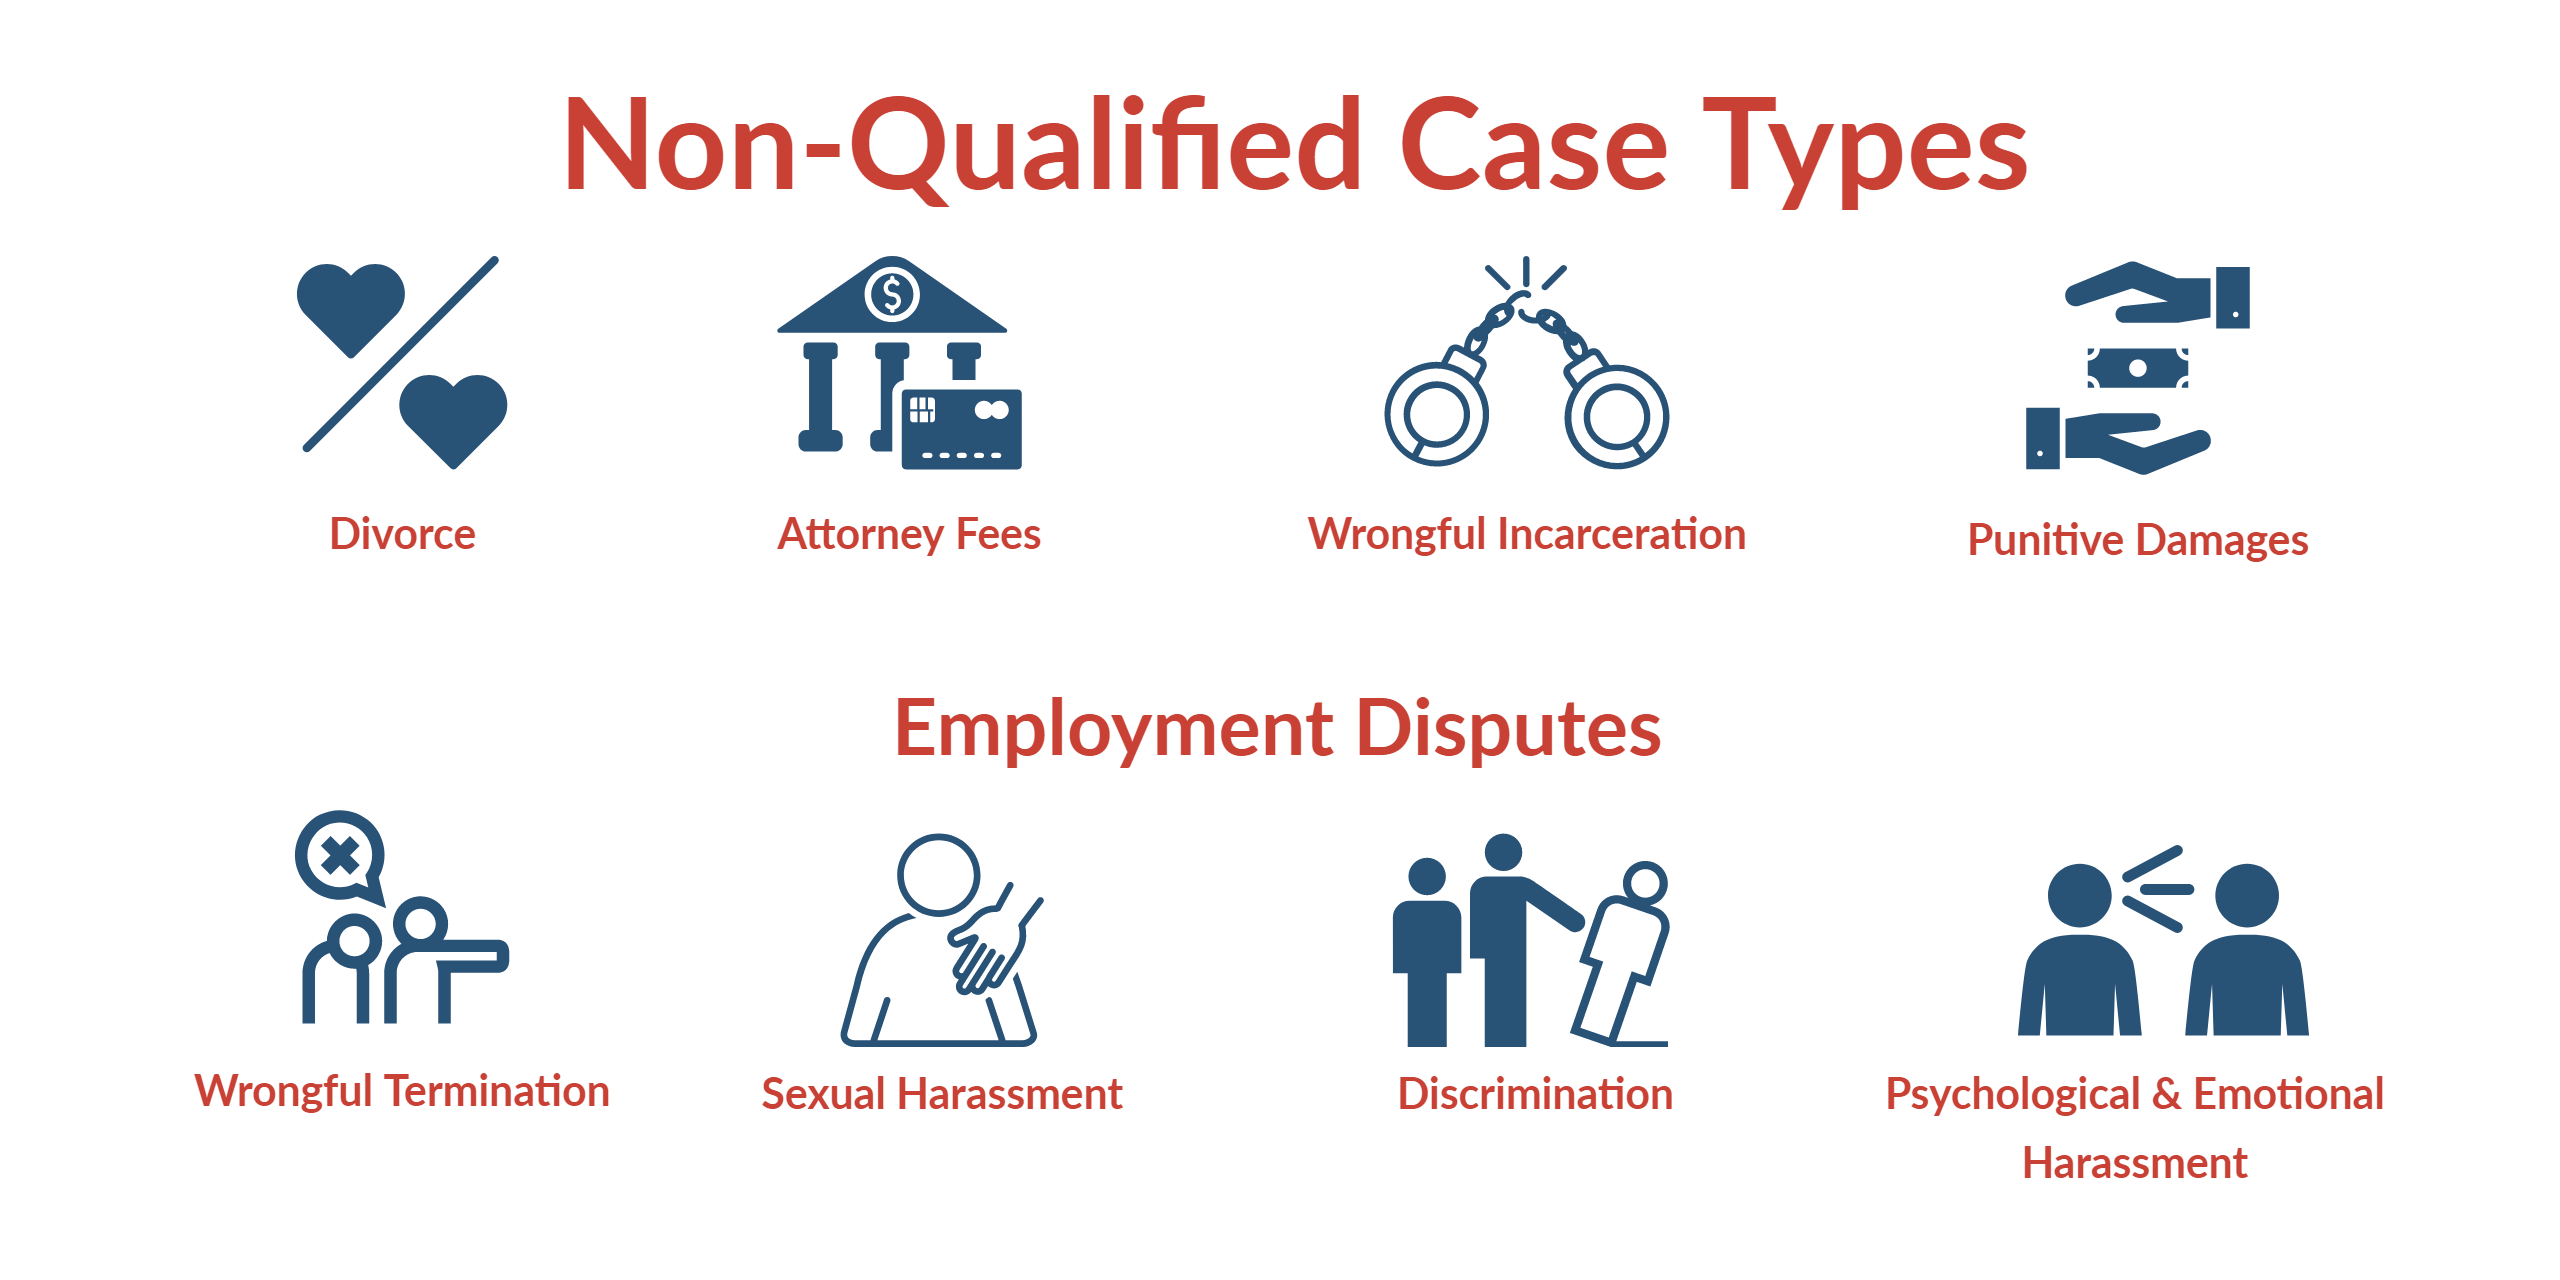 Non-Qualified Case Types